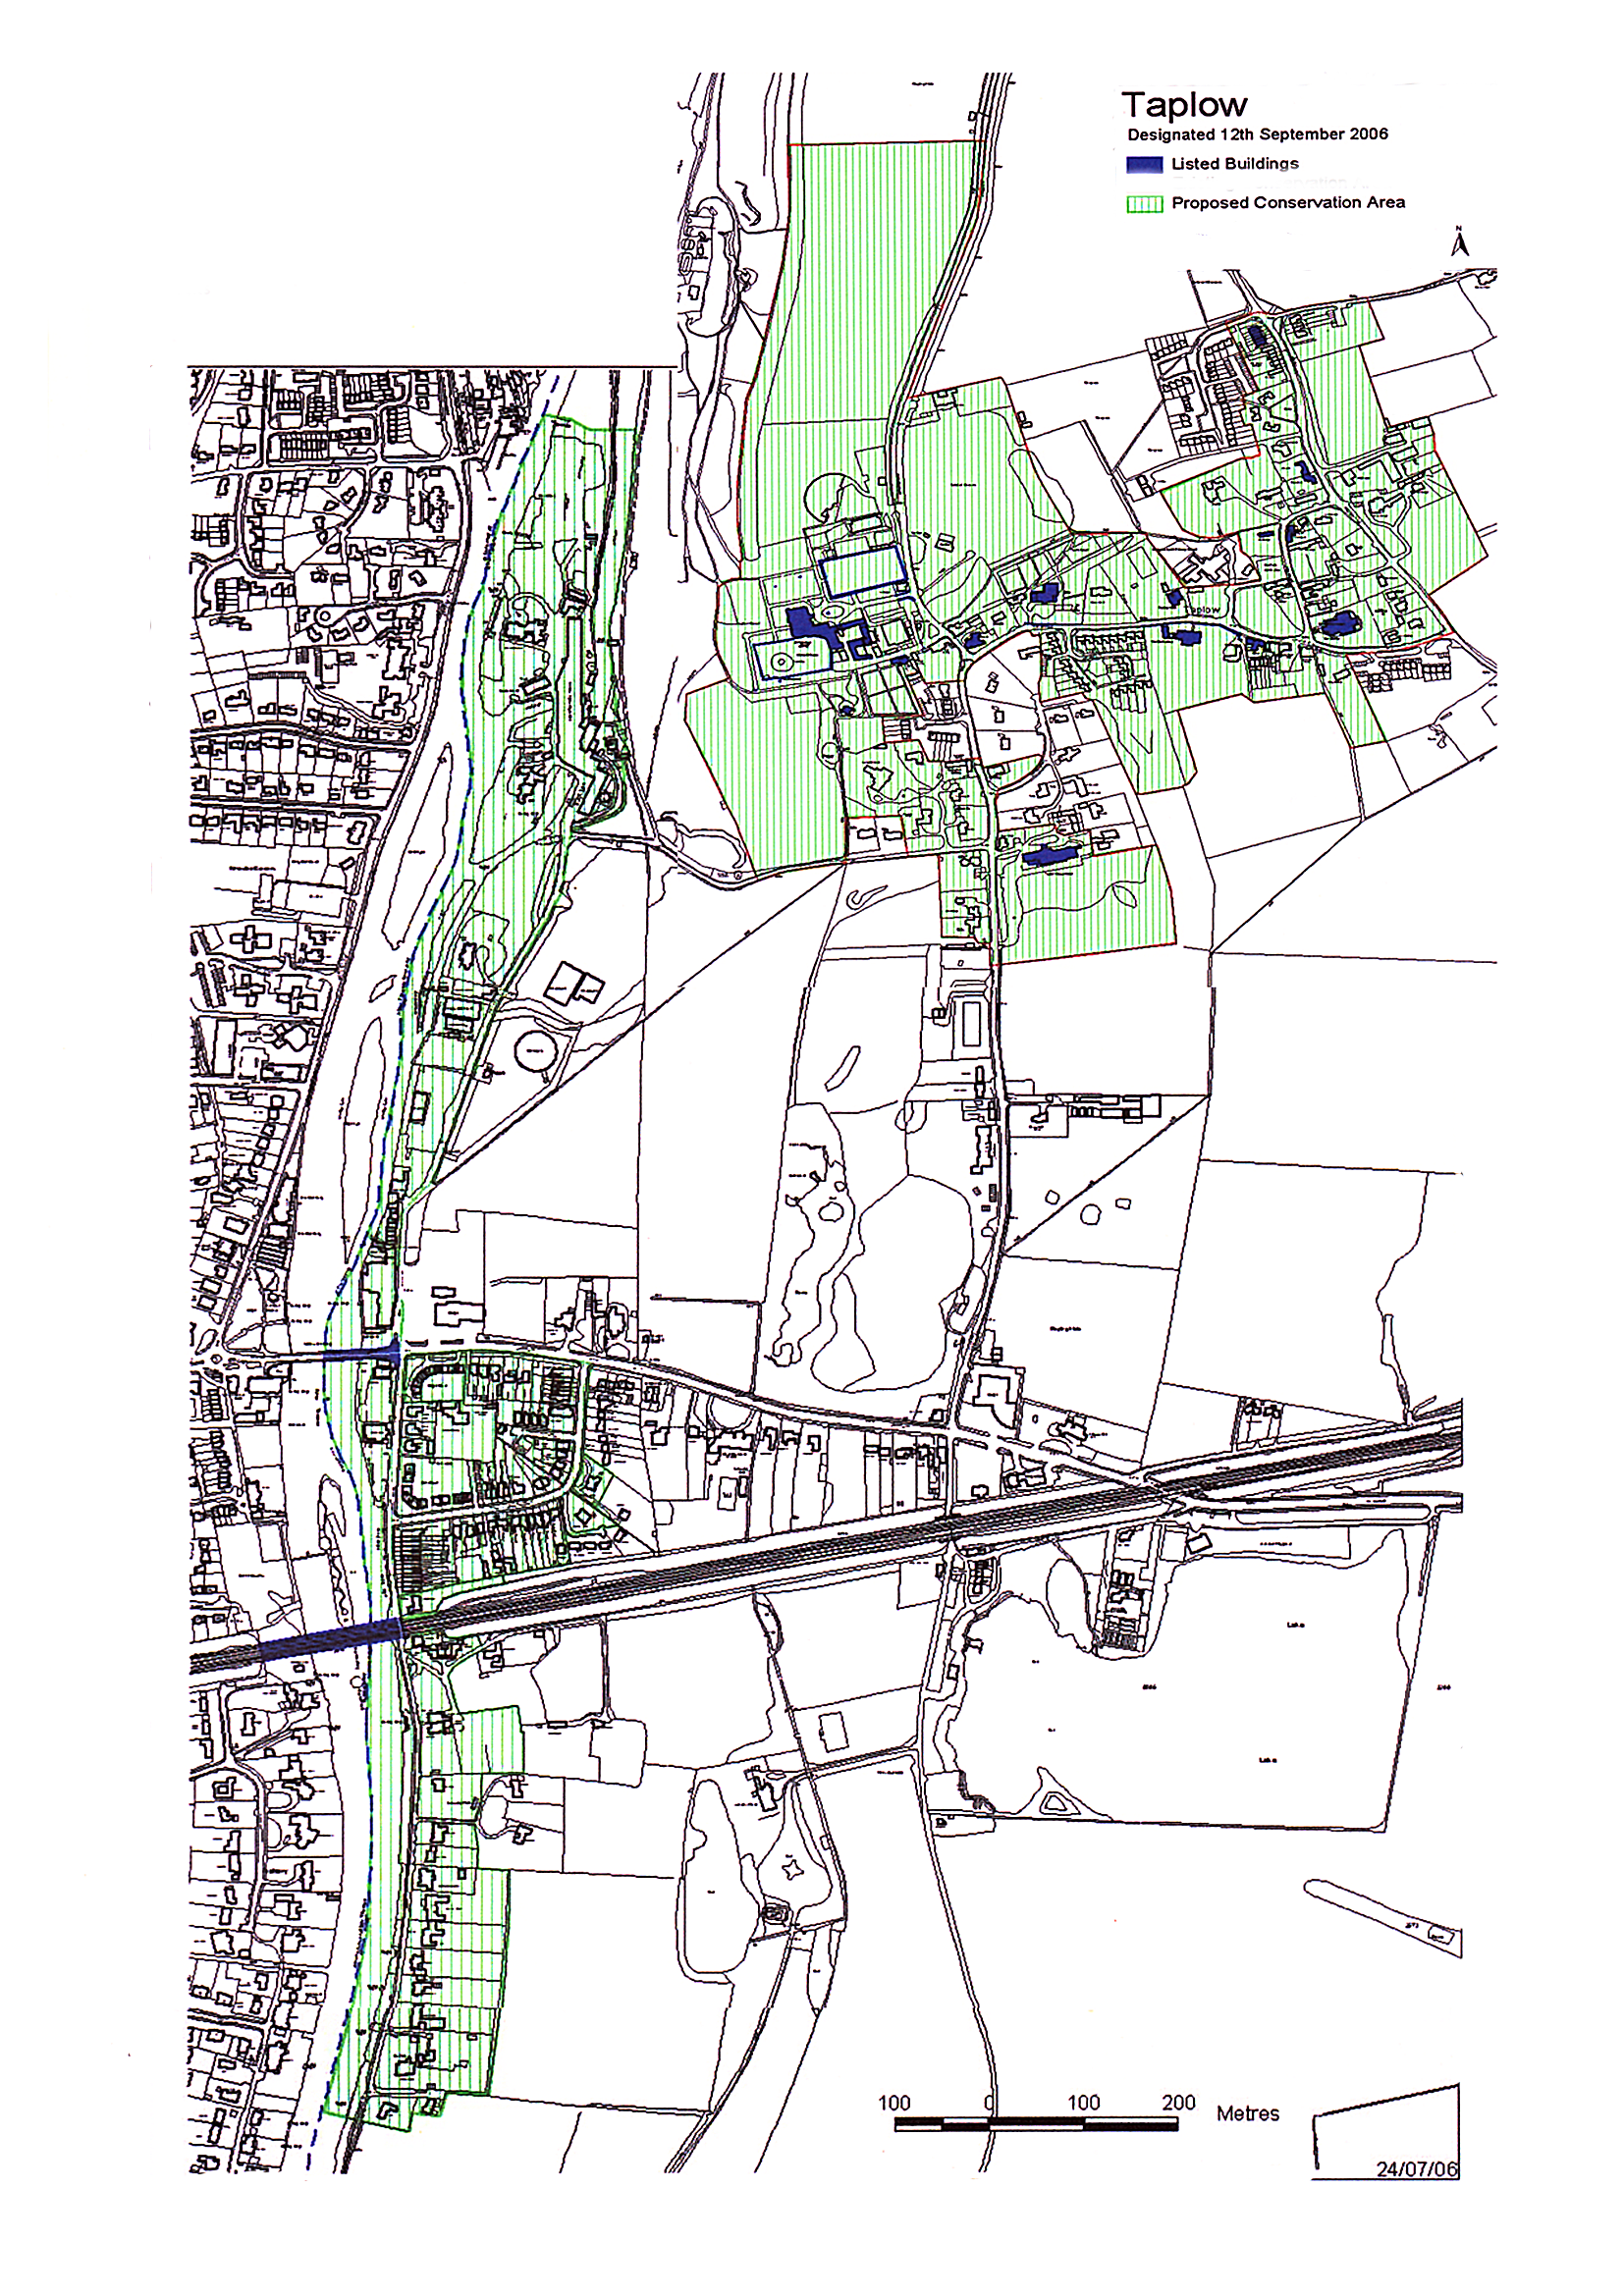 Taplow Conservation Areas 2007